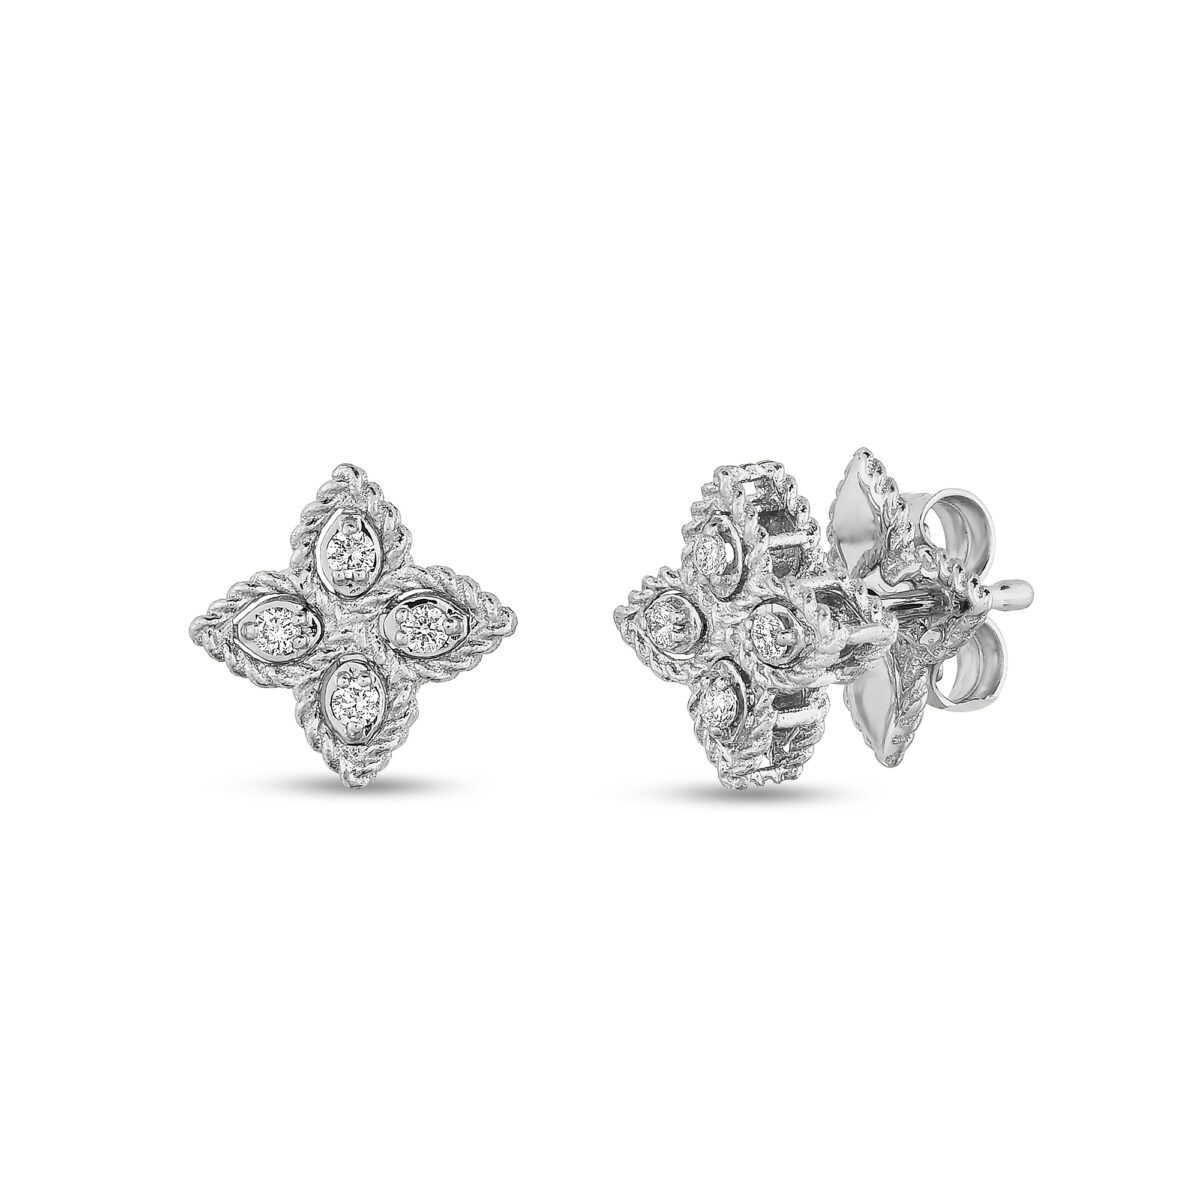 ROBERTO-COIN-PRINCESS-FLOWER-18KT-WHITE-GOLD-SMALL-STUD-EARRINGS-WITH-DIAMONDS-ADR777EA0641